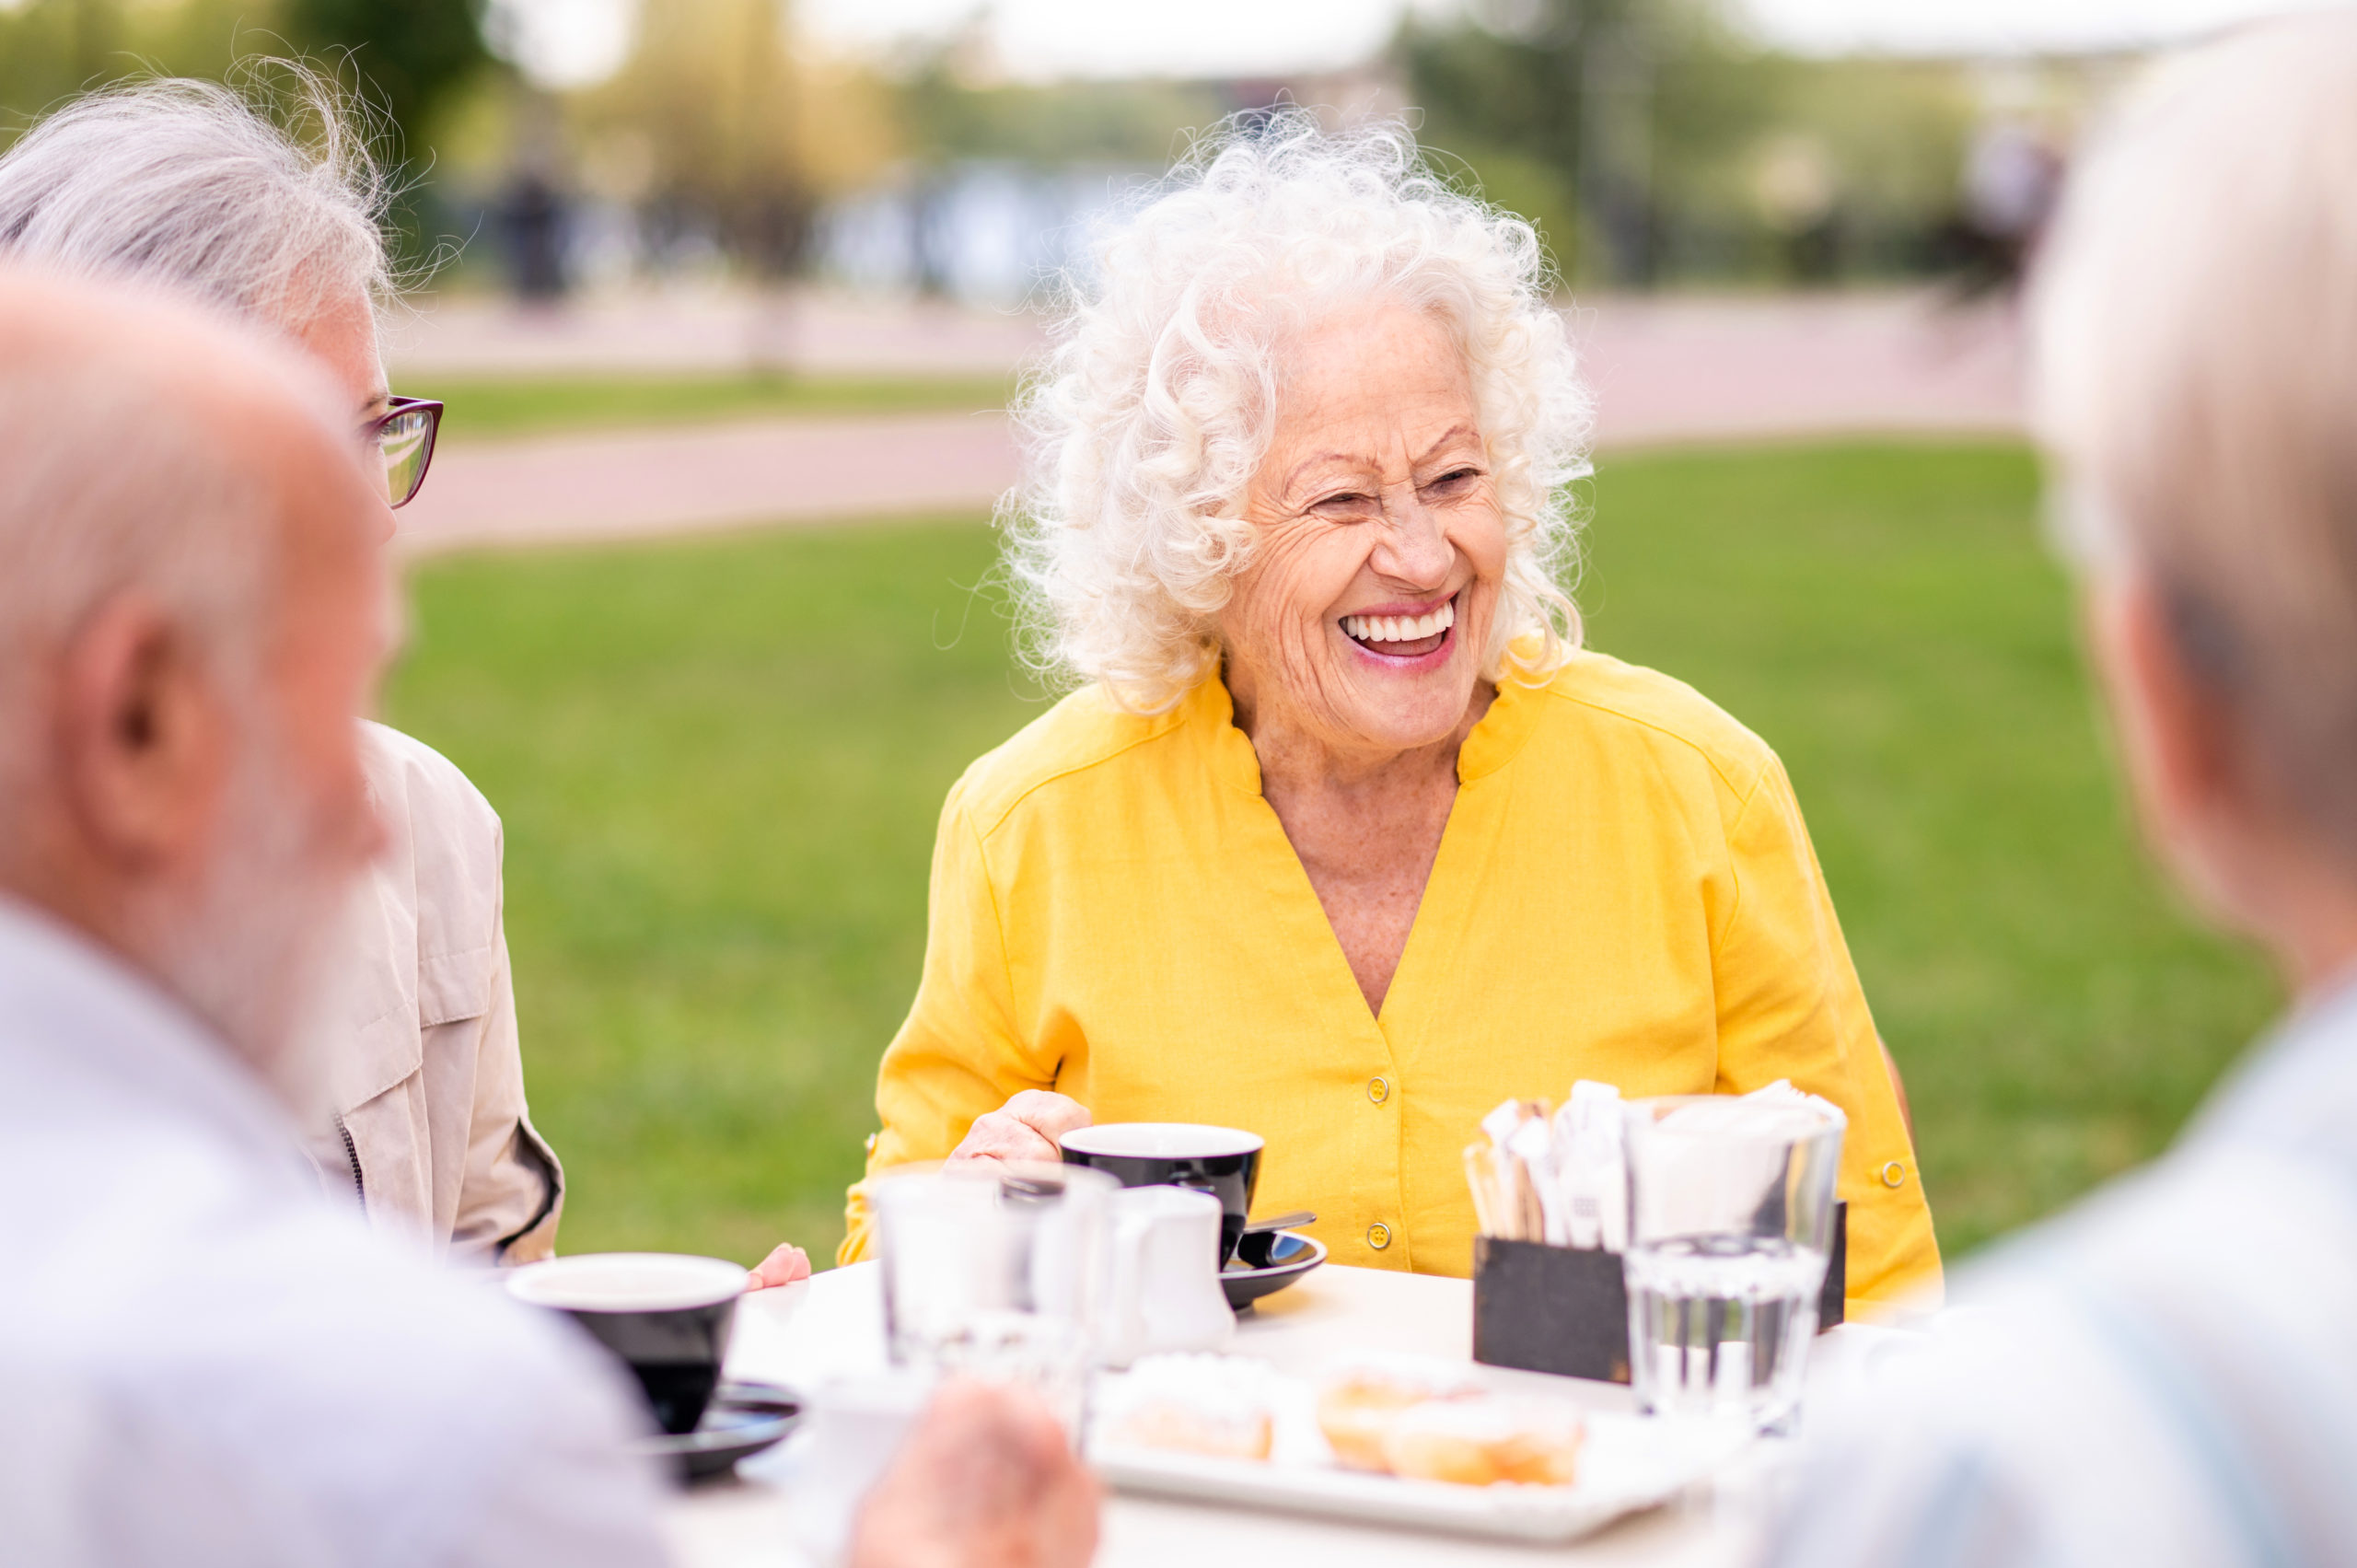 5 Ways to Help Seniors Have a Great New Year